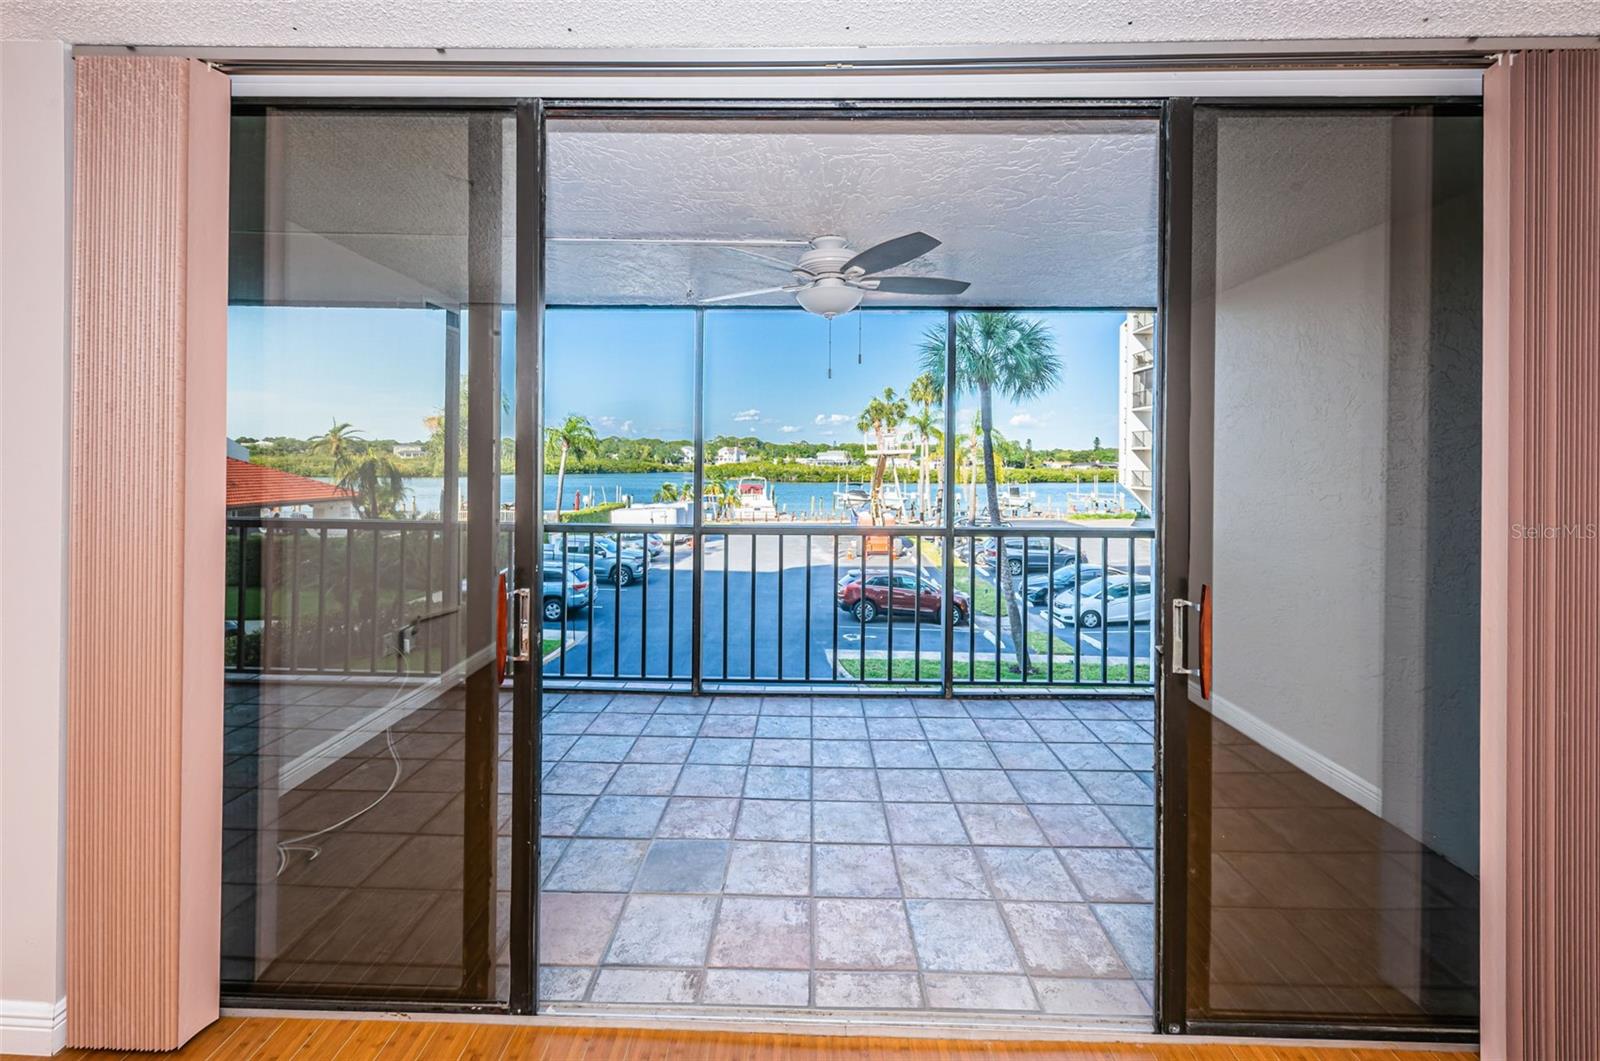 Step out onto the huge balcony overlooking the pool, boat slips and the Waterfront!